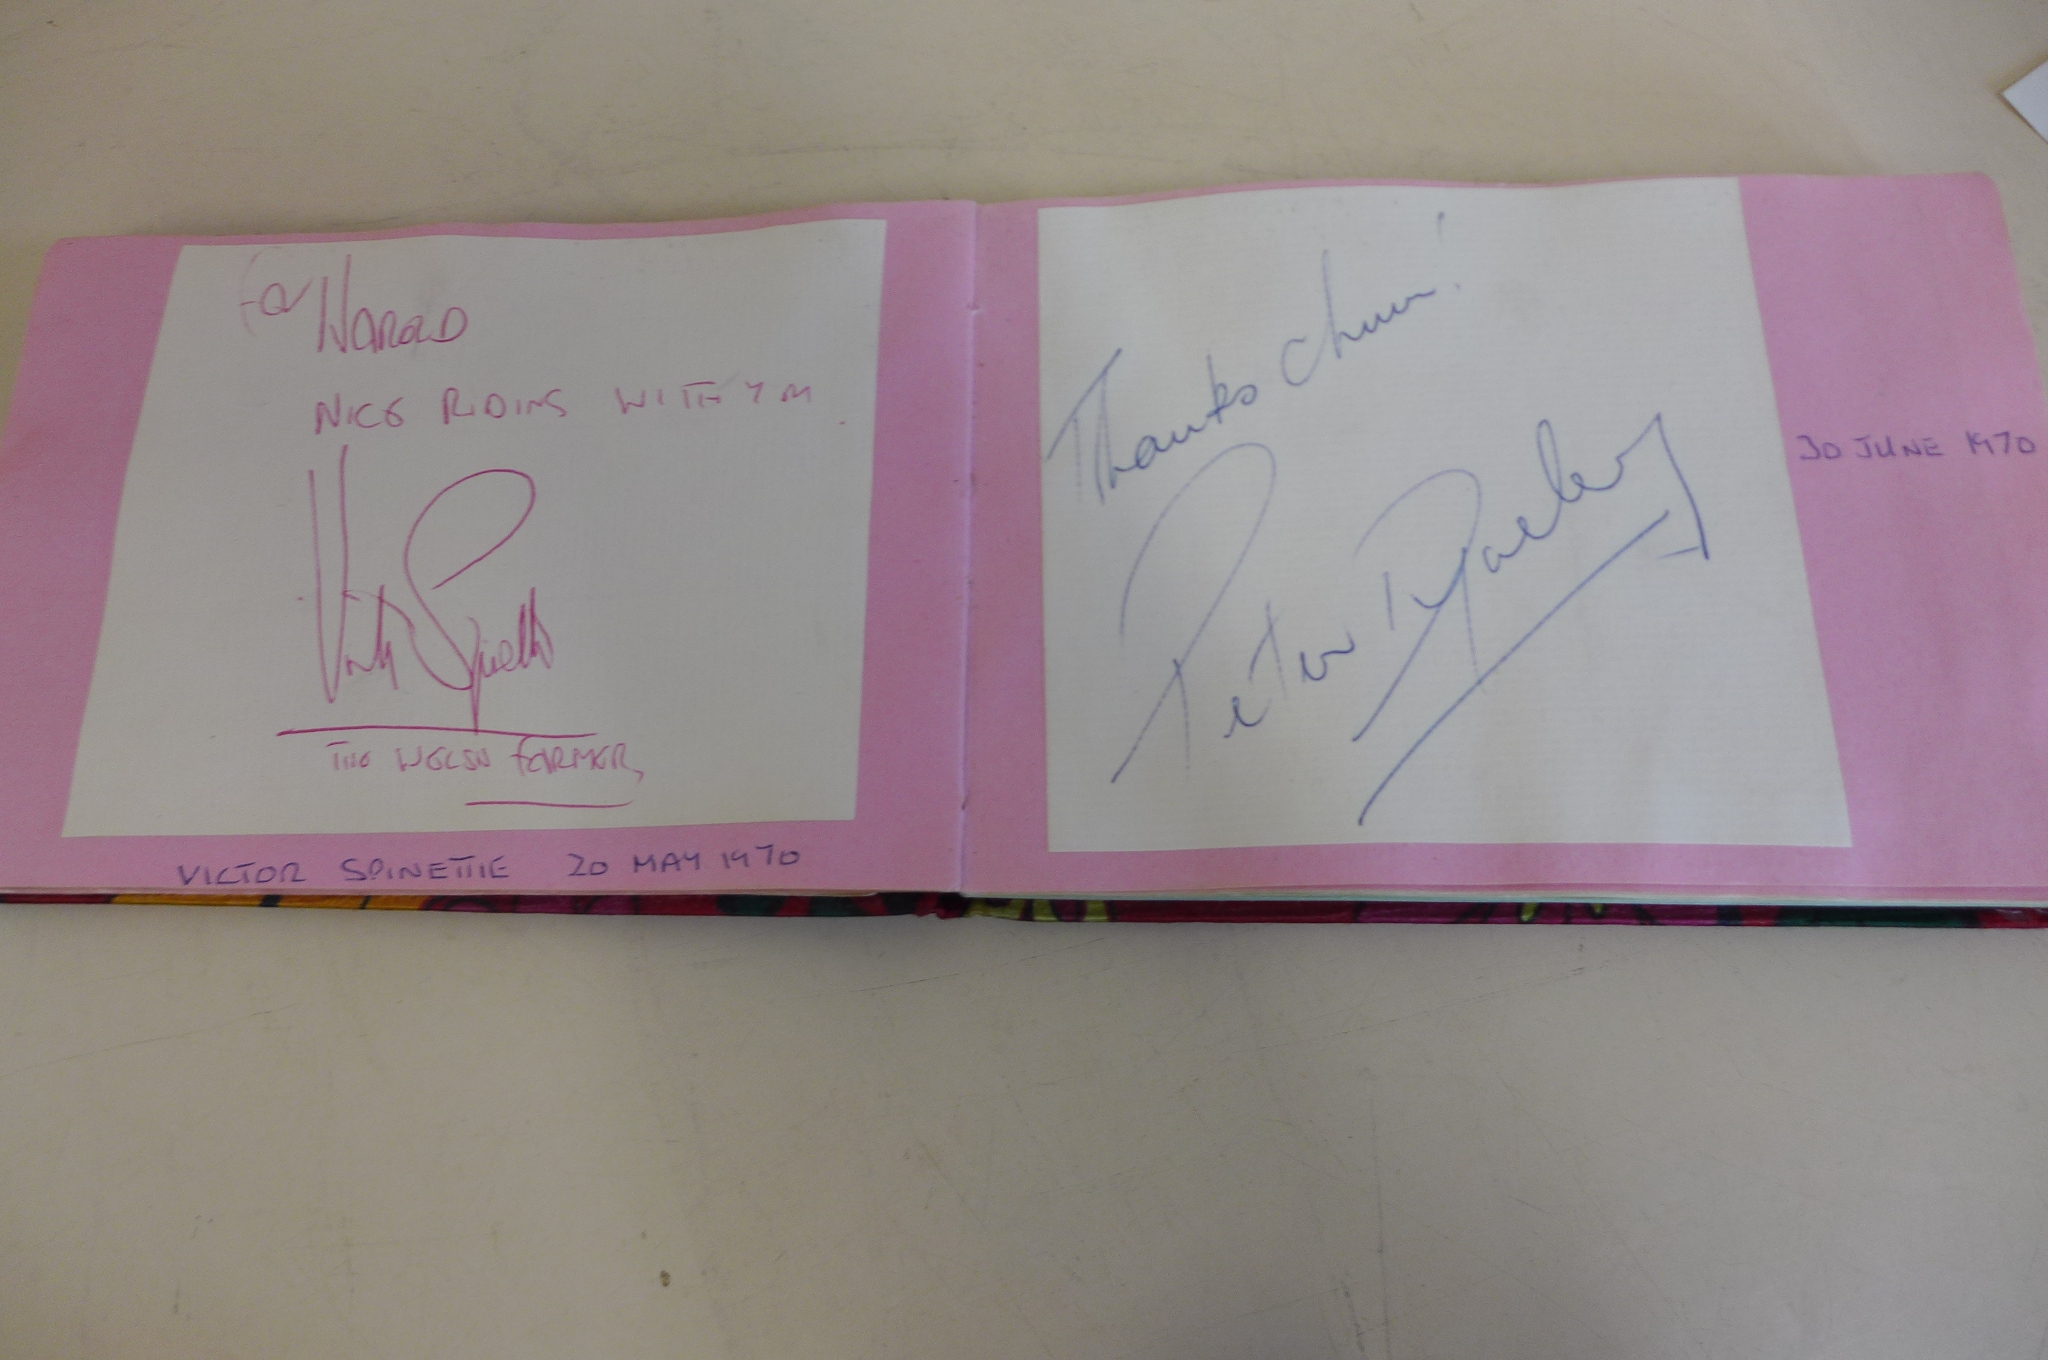 An interesting autograph book with autographs, including Topol, Christopher Lee, Ava Gardner, - Image 4 of 11